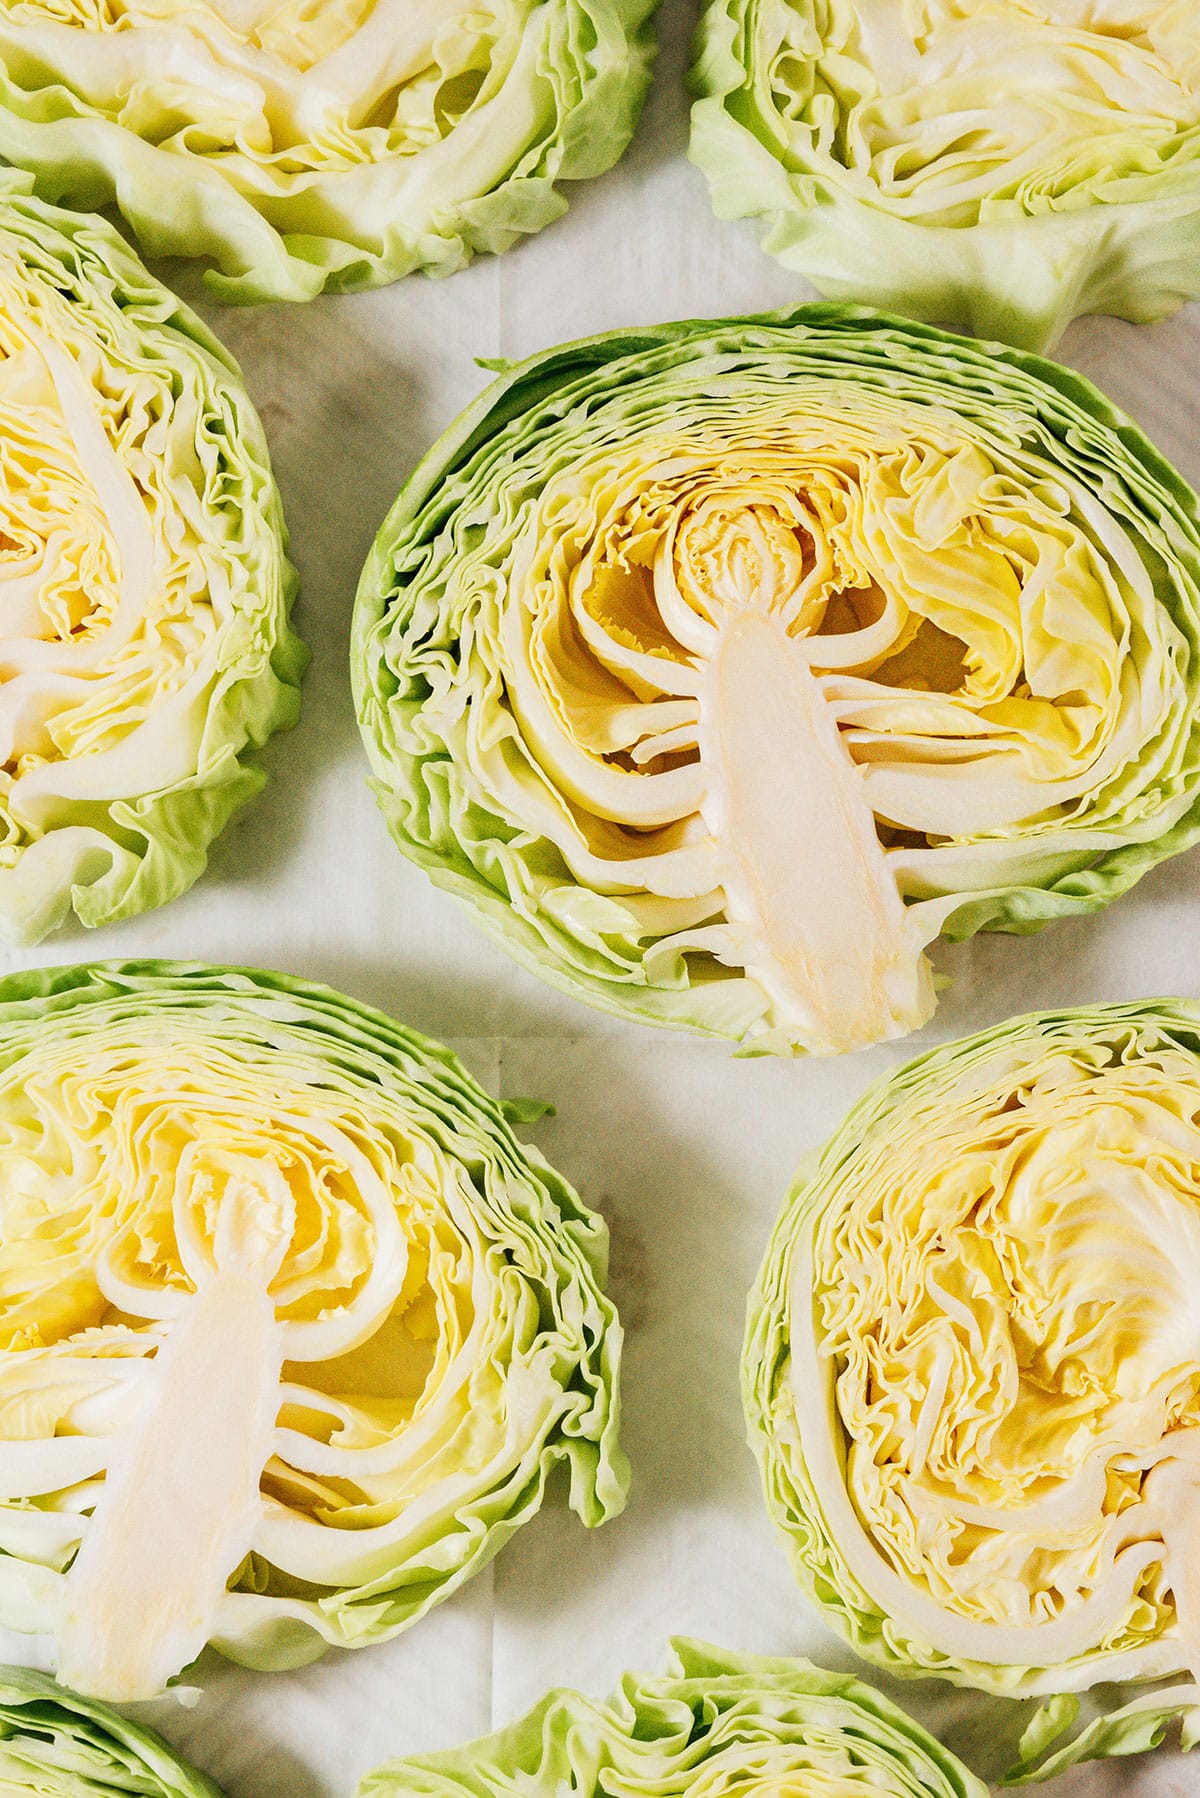 Cabbages sliced close up.